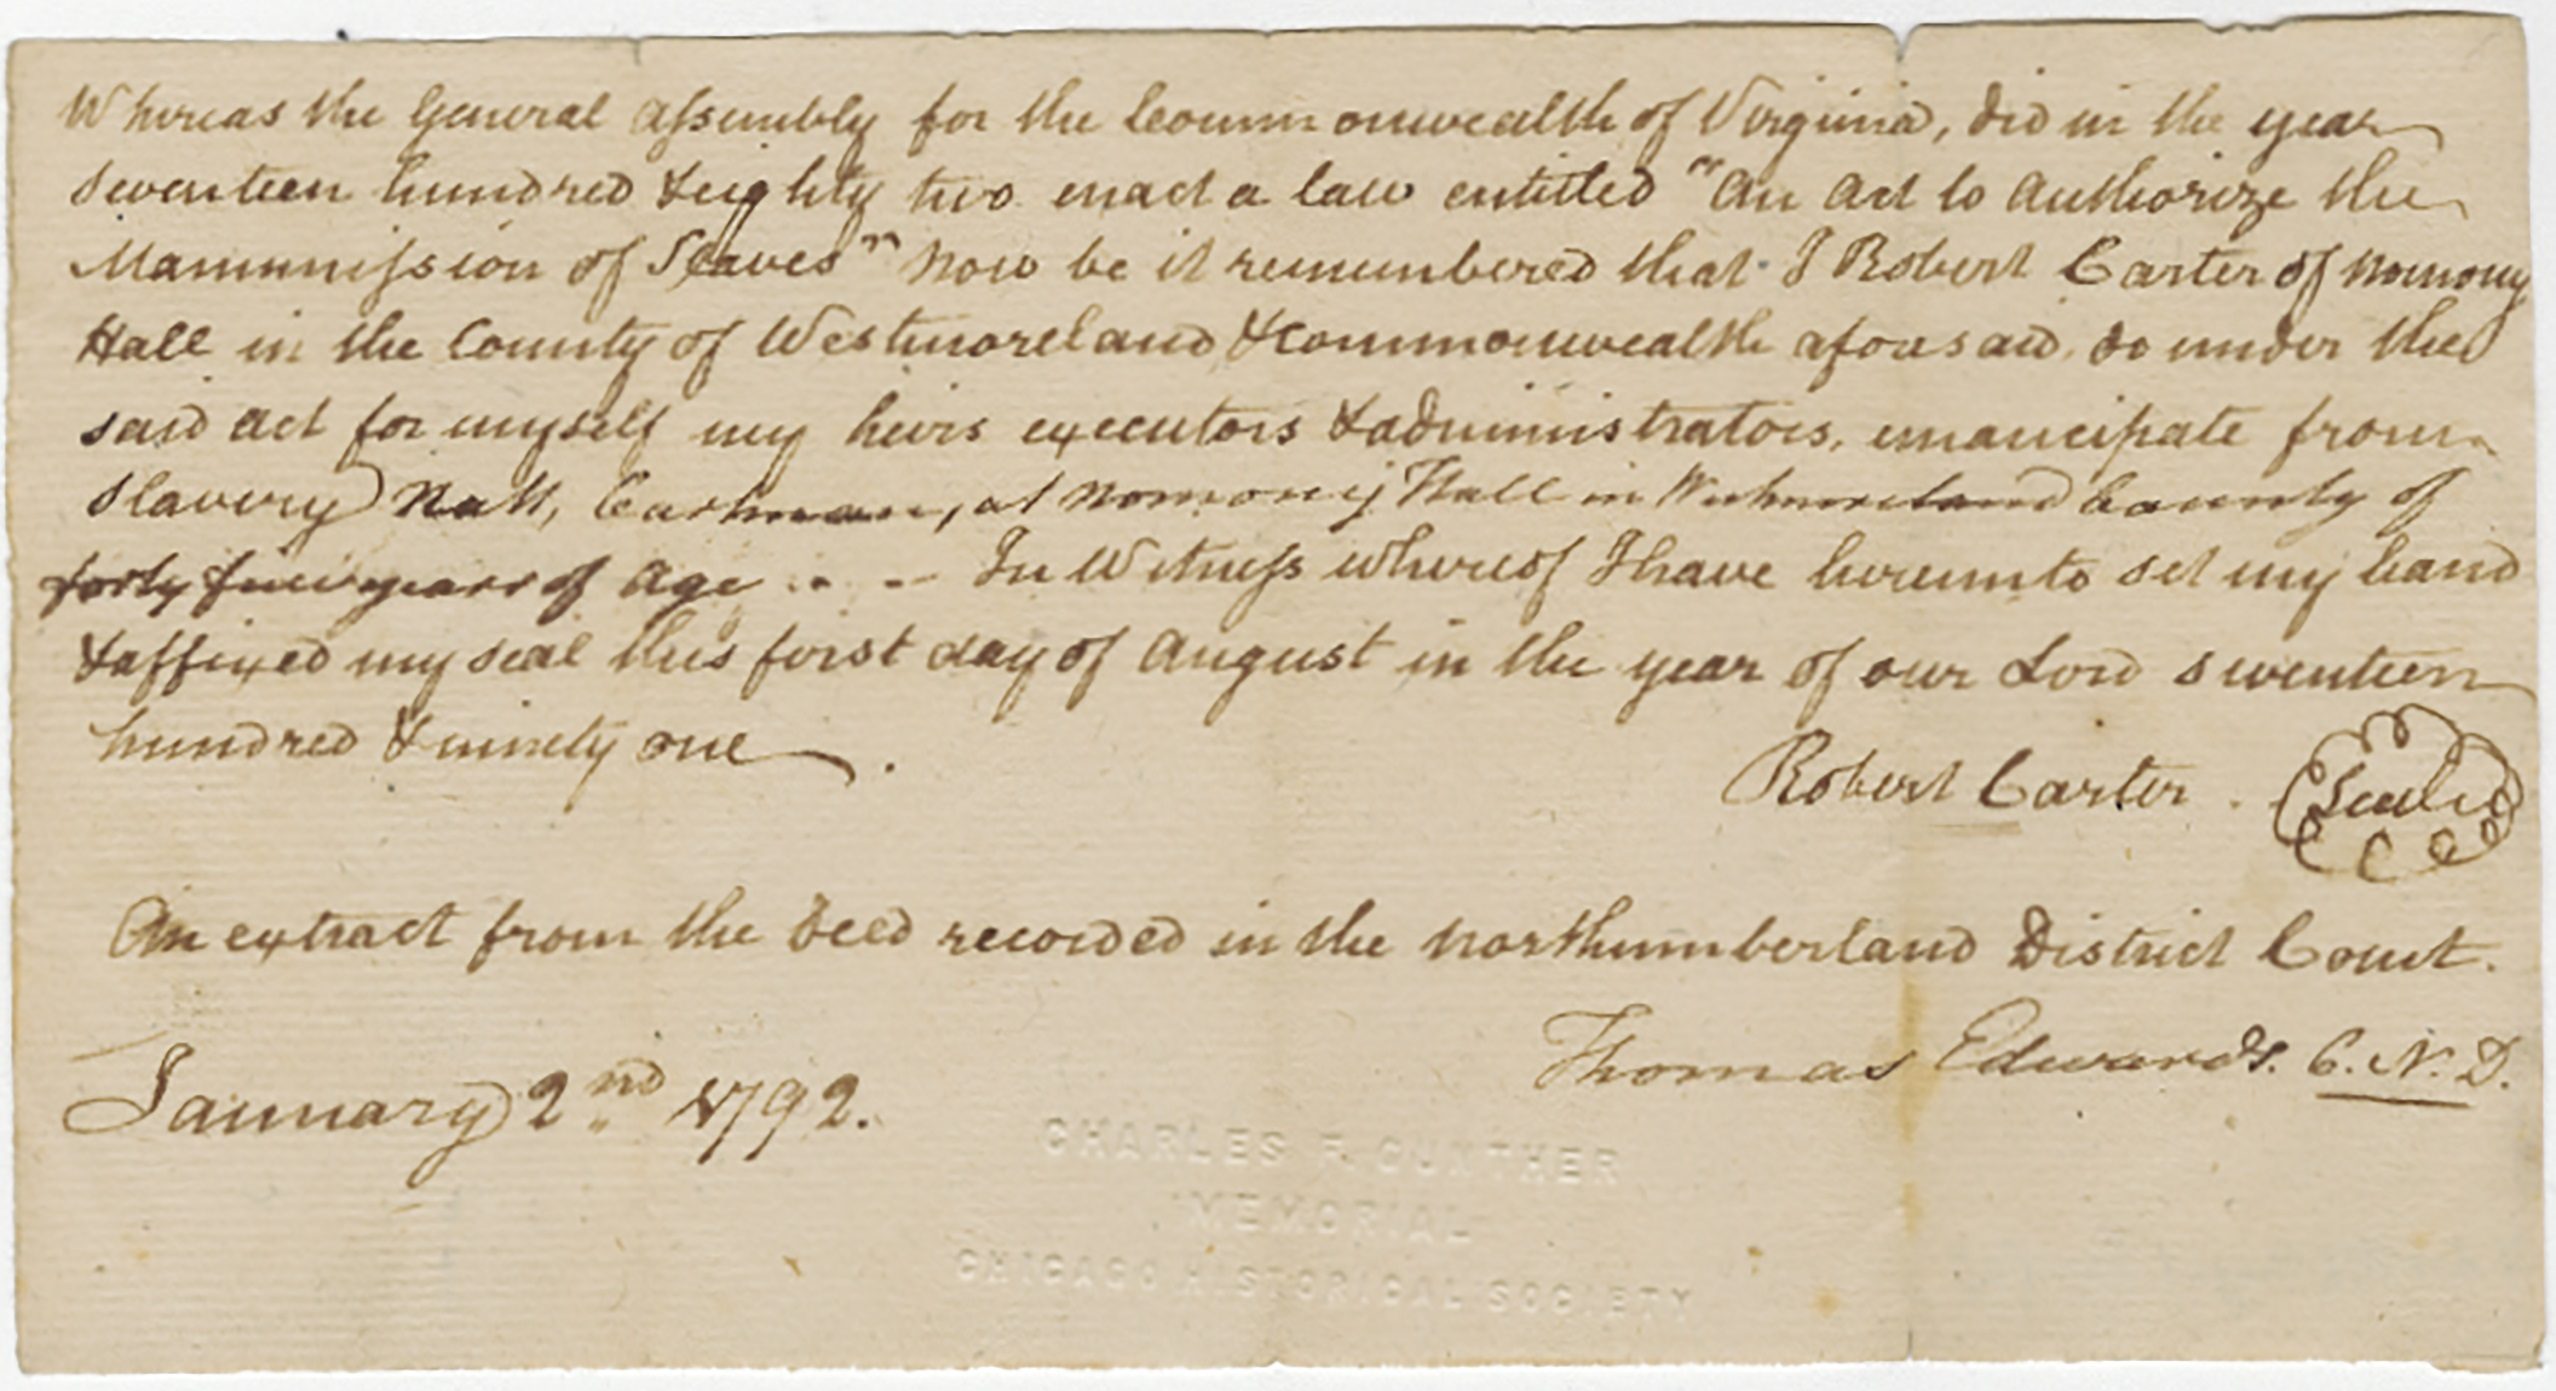 View of a letter written by Robert Carter regarding the manumission of several enslaved people he owned, including Daniel Wilson, Gabriel Johnson and Primus Johnson, January 2, 1792.